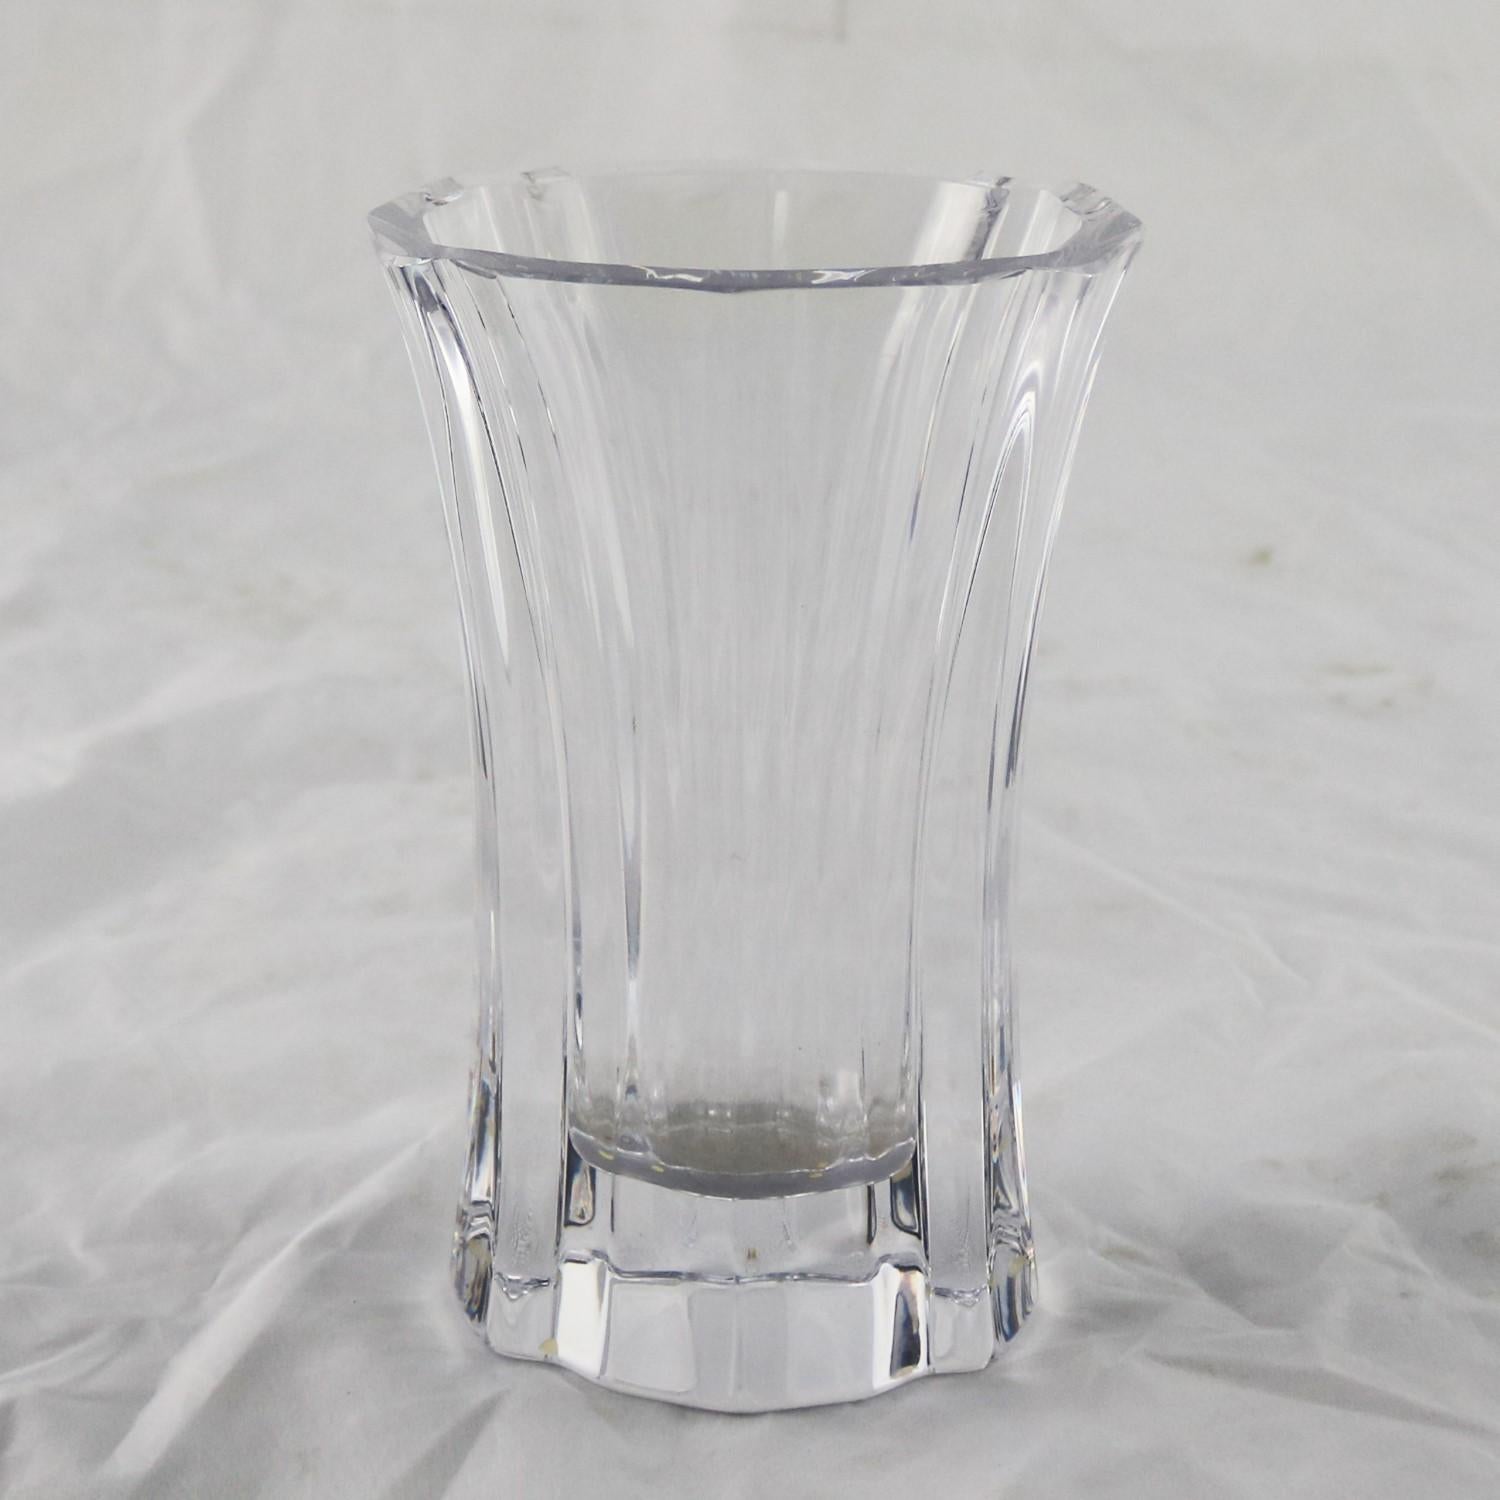 Swedish Orrefors Crystal Vase by Lars Hellsten Signed and Numbered LH 4599-22